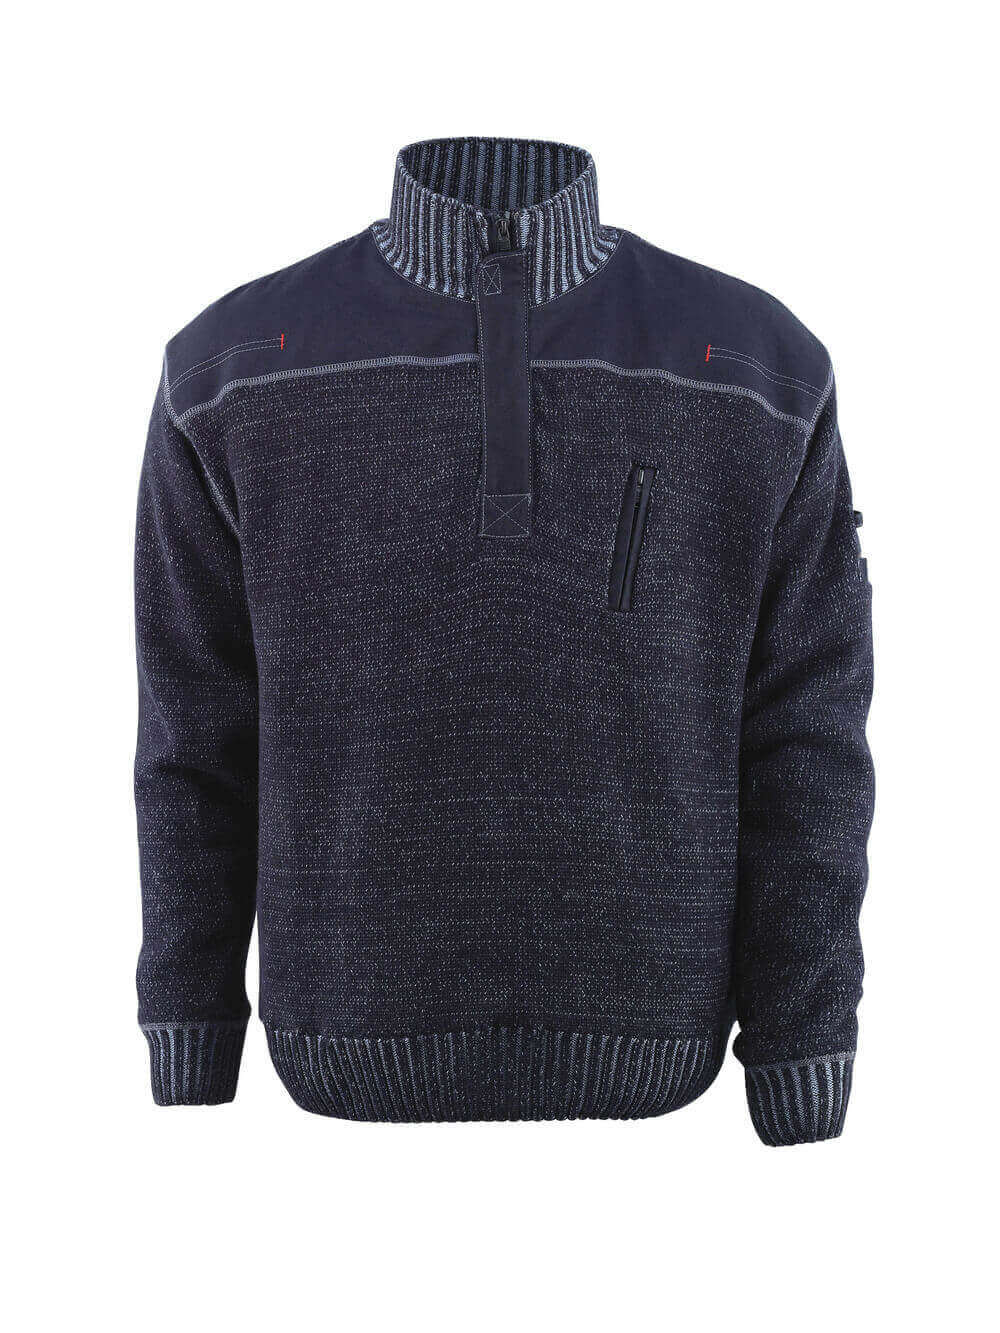 Mascot FRONTLINE  Naxos Knitted Jumper with half zip 50354 blue grey